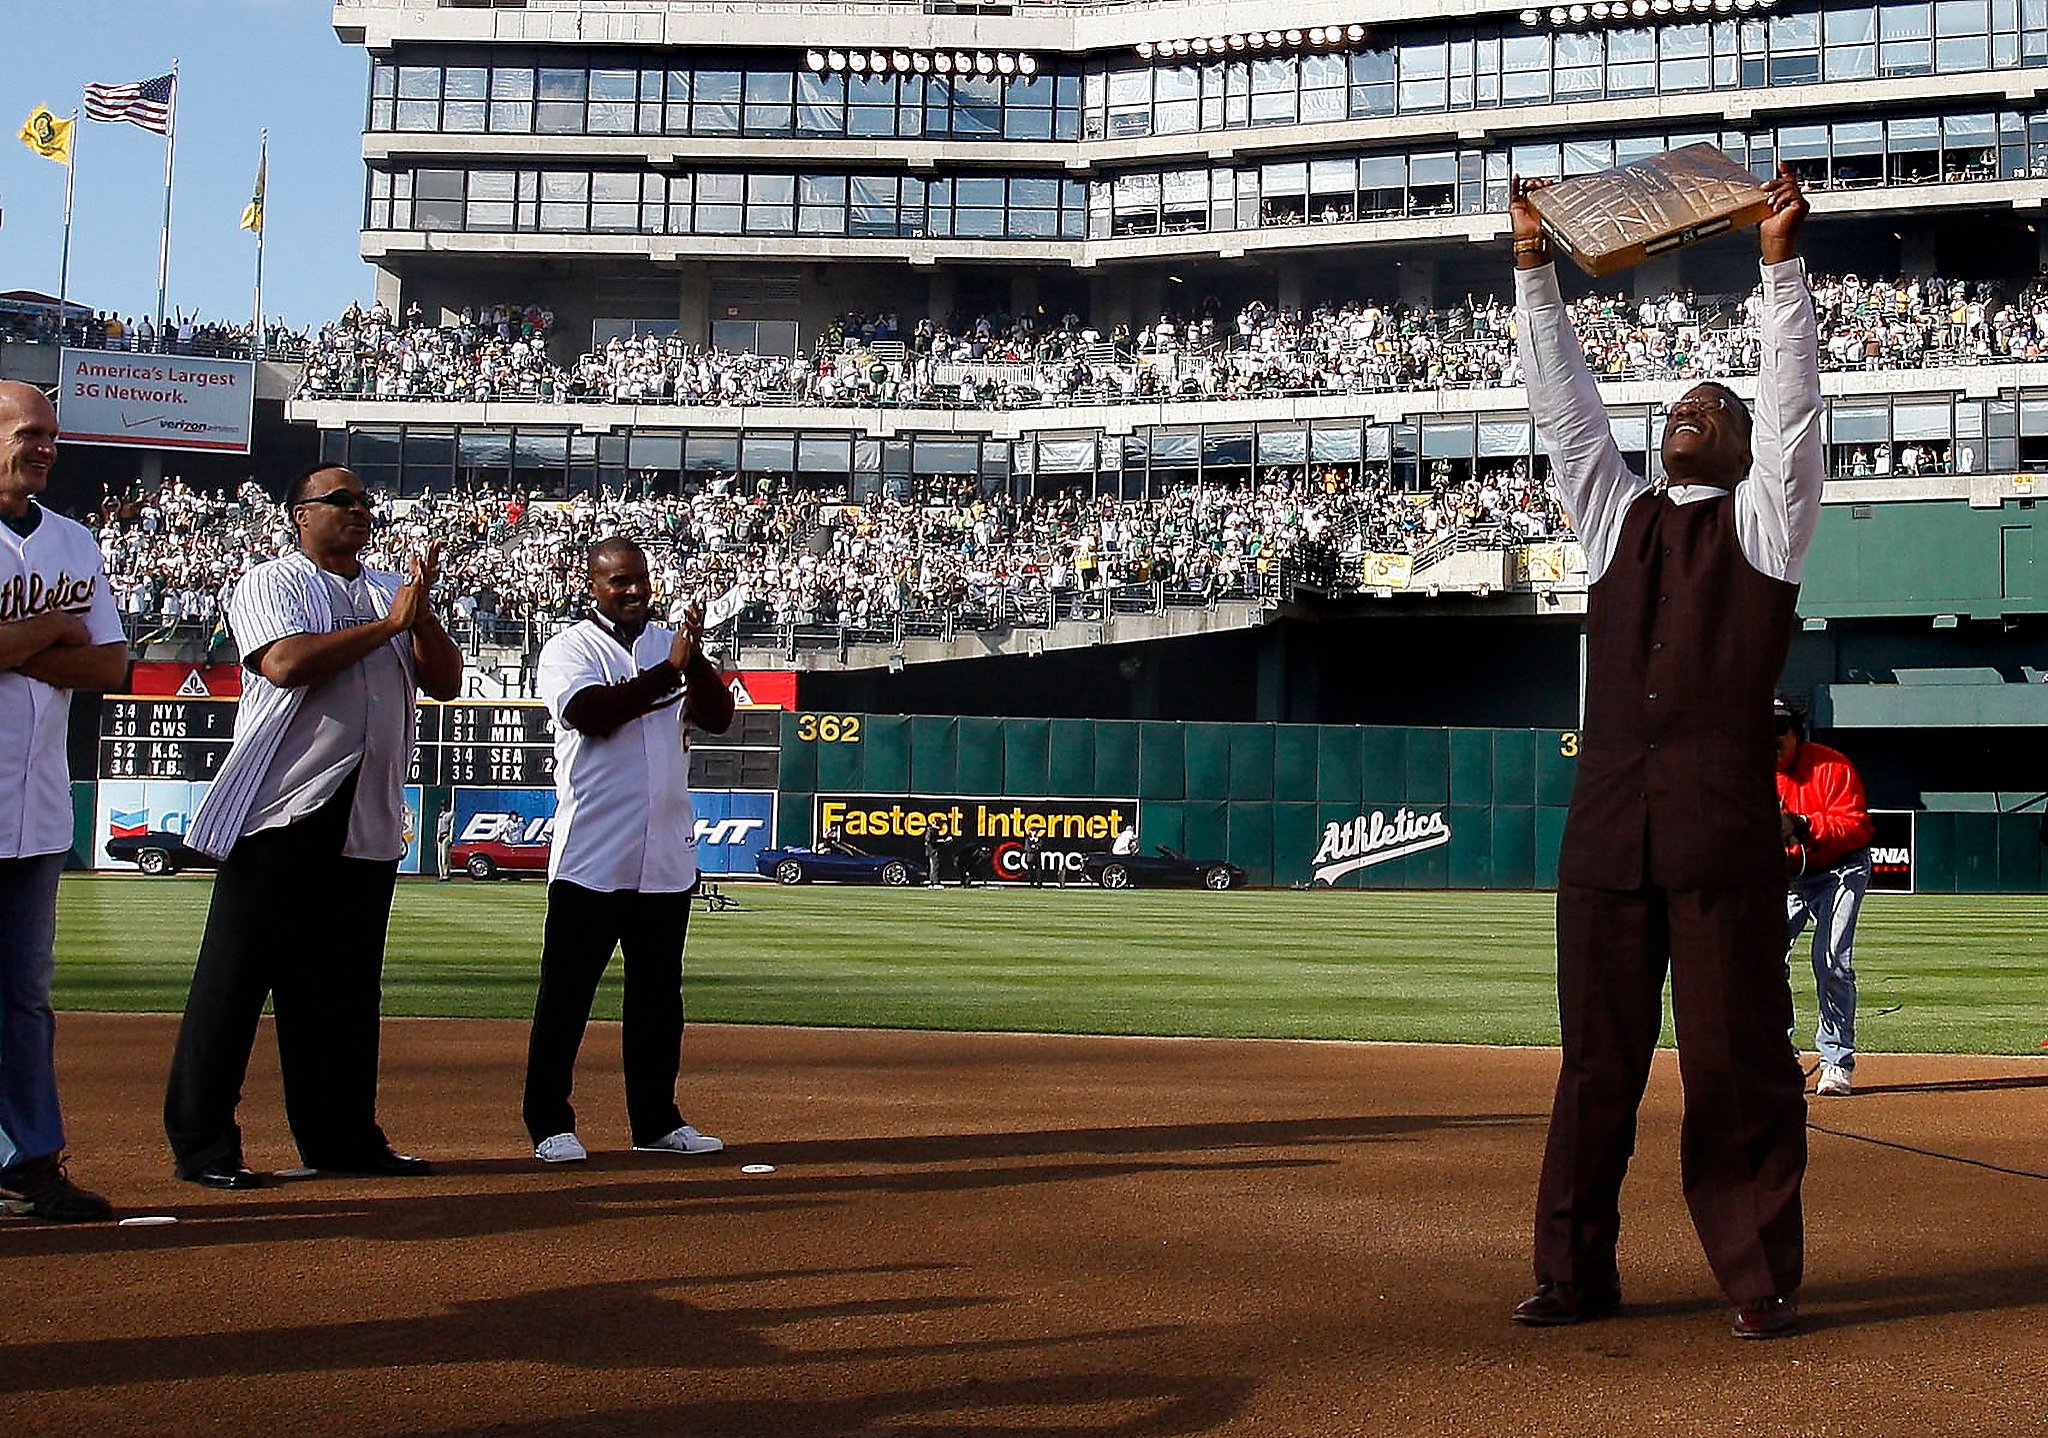 Athletics to honor Rickey Henderson by naming Coliseum field